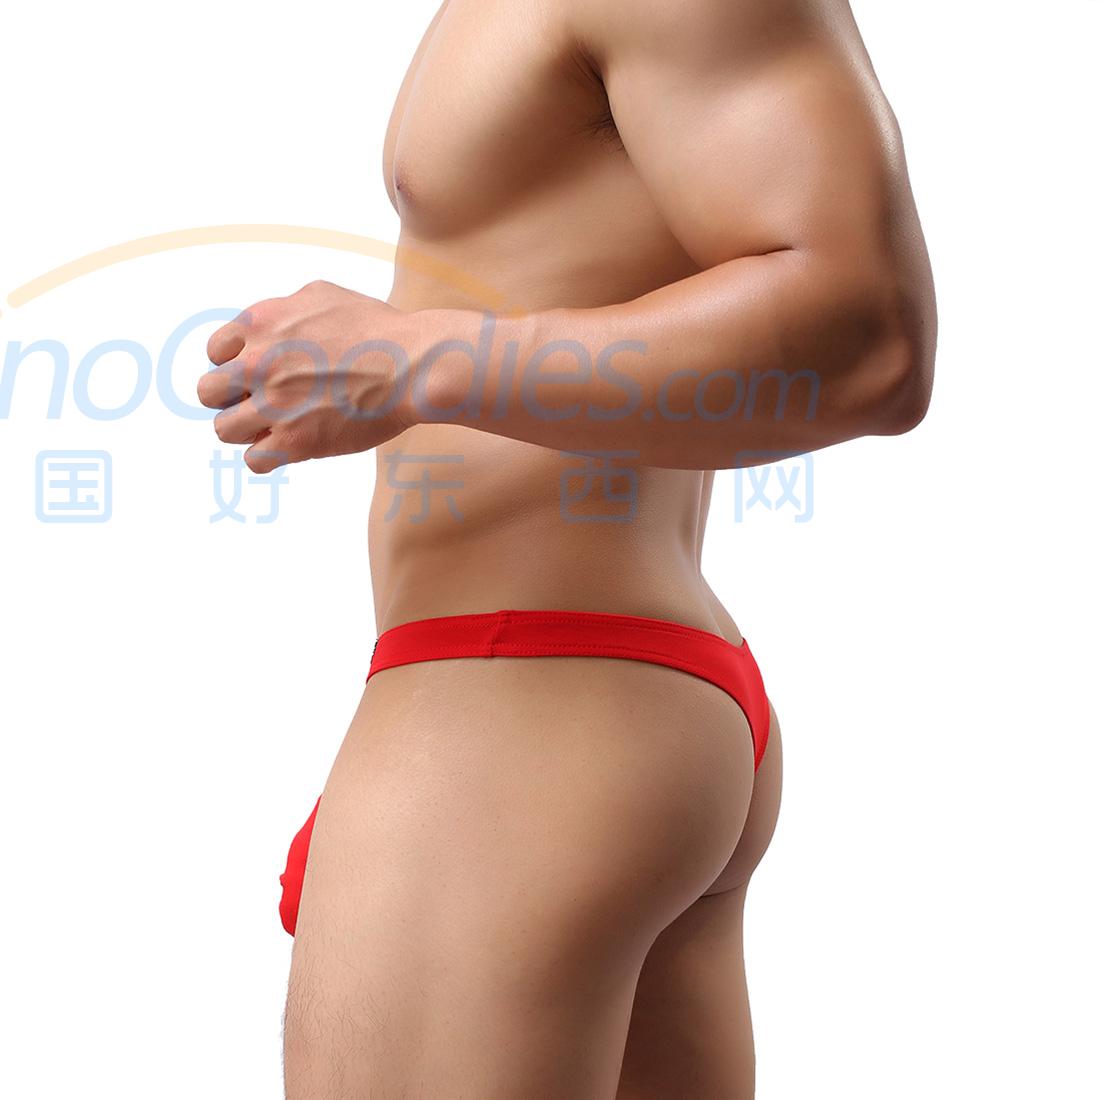 Men's Sexy Lingerie Underwear Modal Triangle Pants Shorts with Penis Sheath JET Bikini WH9 Red L